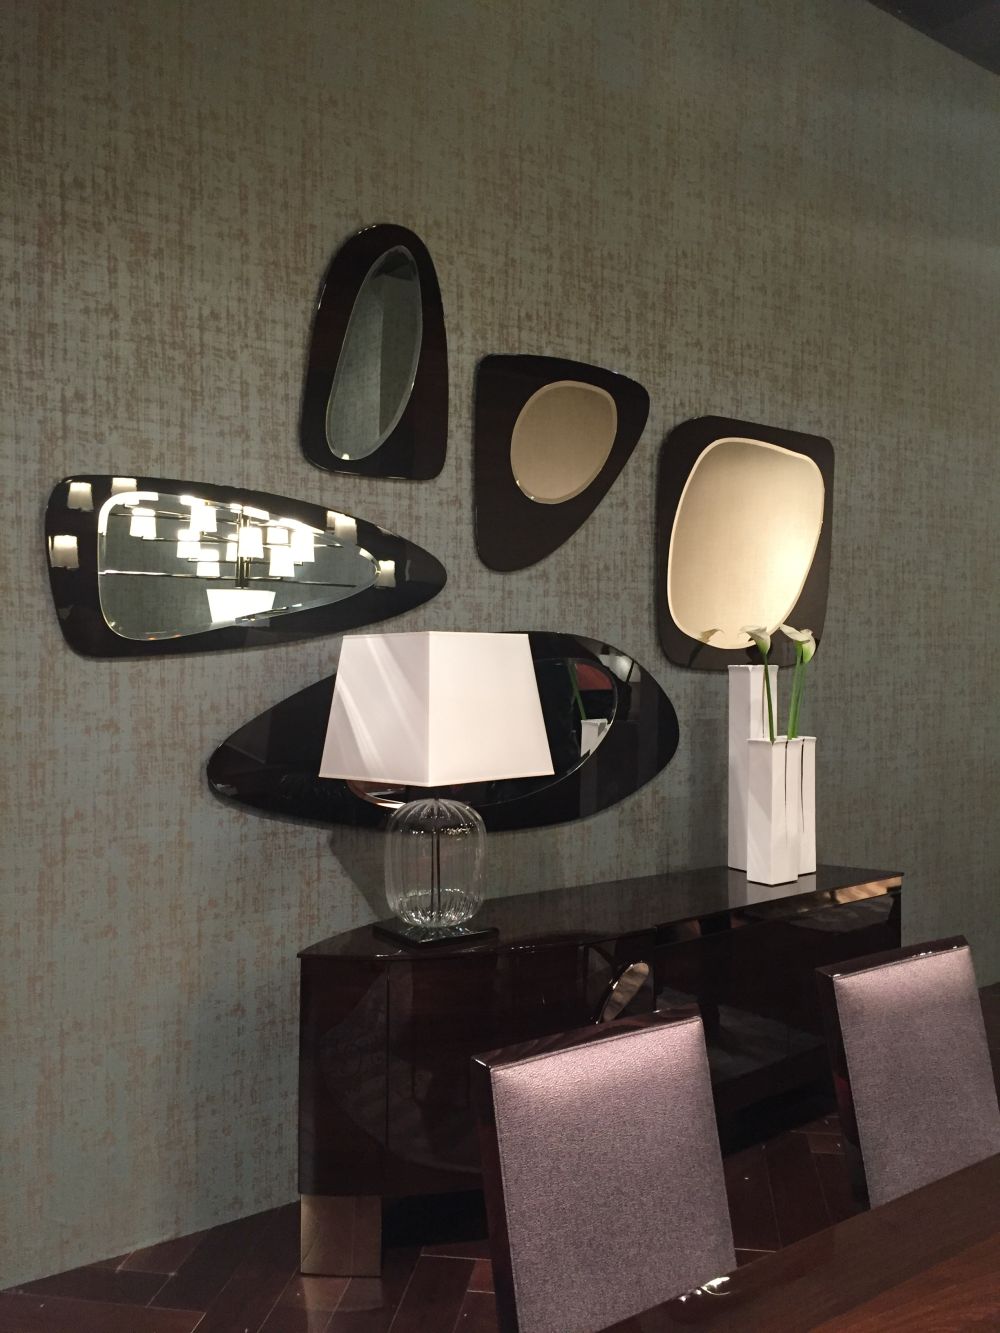 Decorating the wall with different mirrors